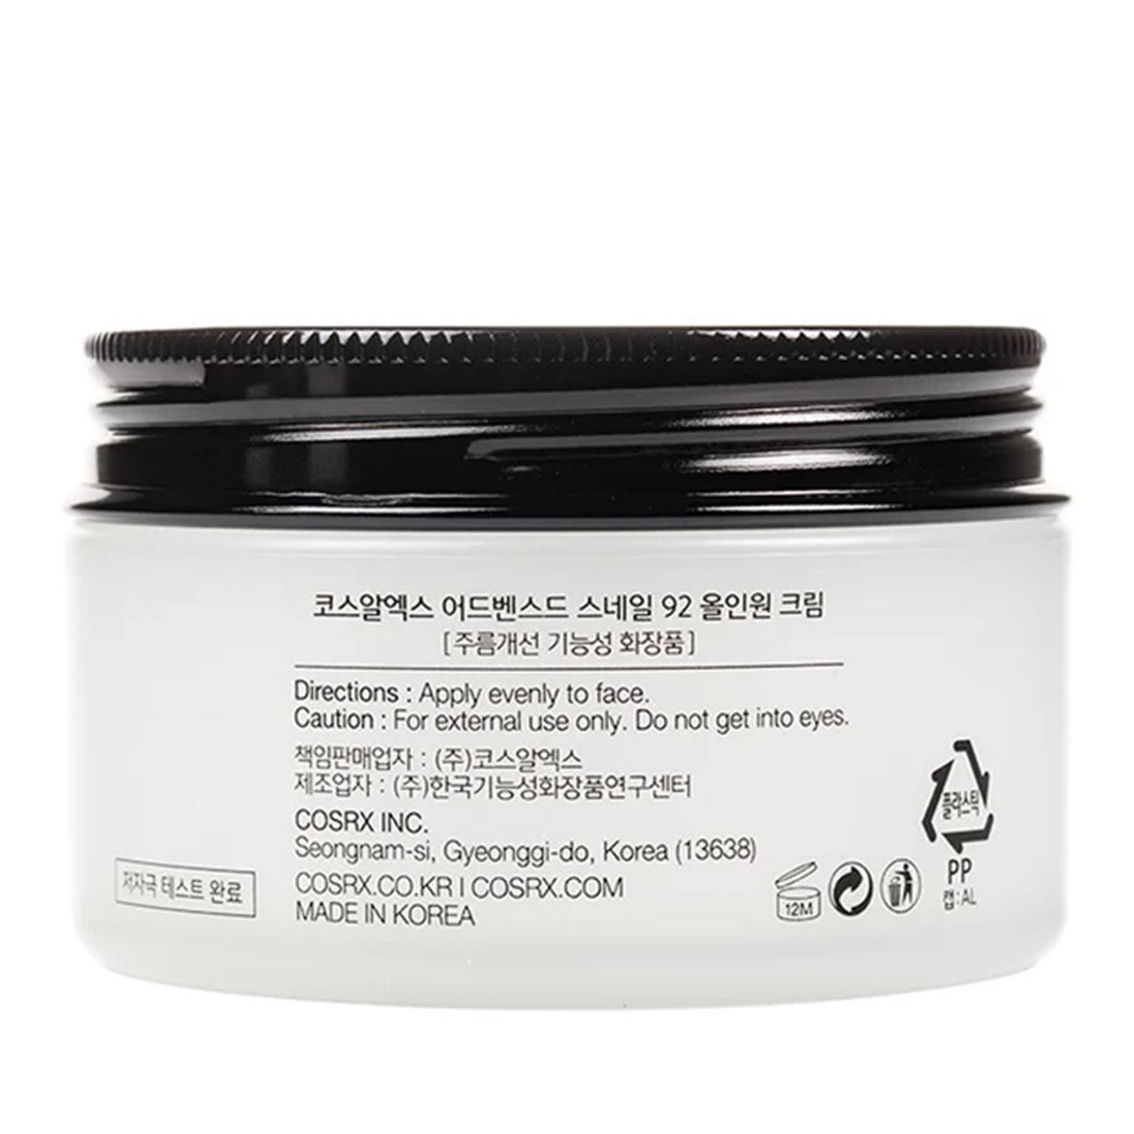 COSRX Advanced Snail 92 All in One Cream 100 g - Image 2 of 5